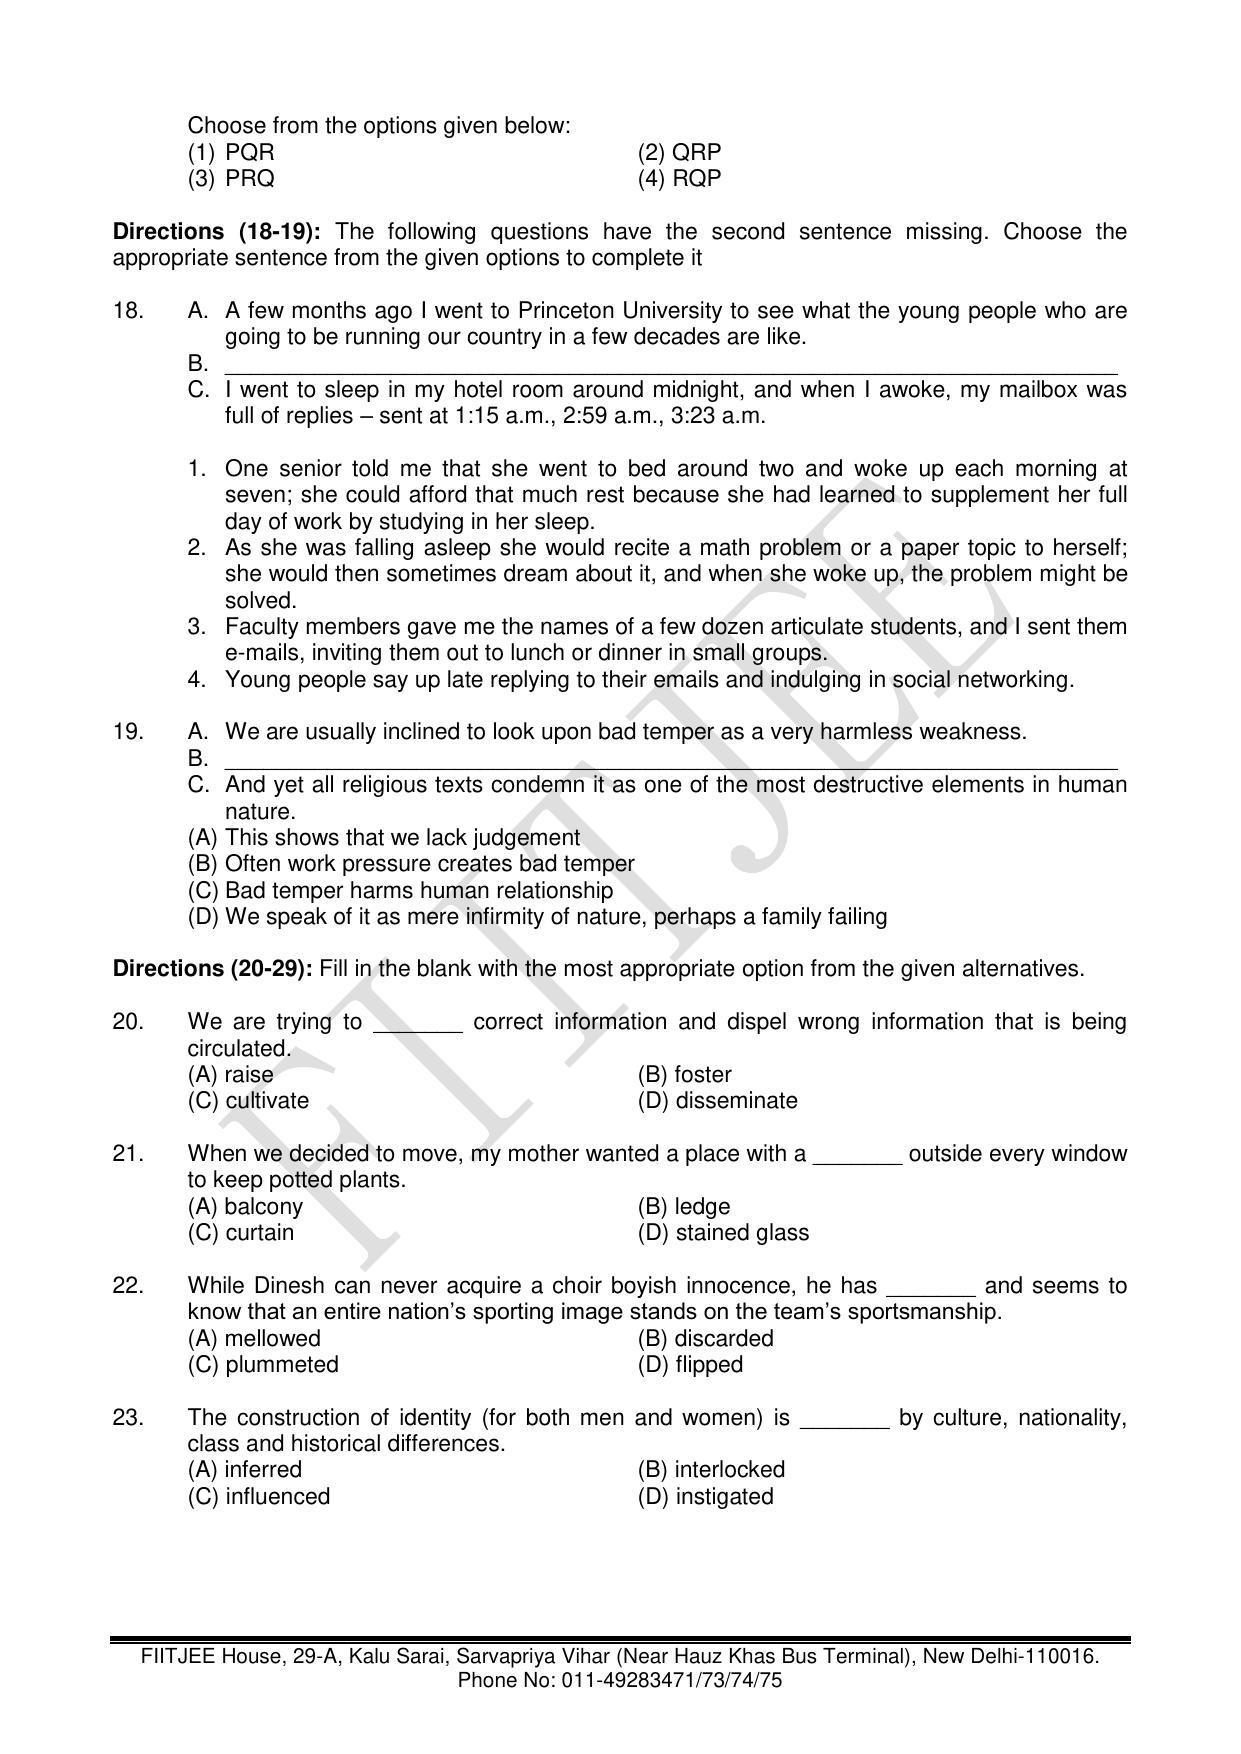 NTSE 2017 (Stage II) Language (LCT) Question Paper (May 14, 2017) - Page 5